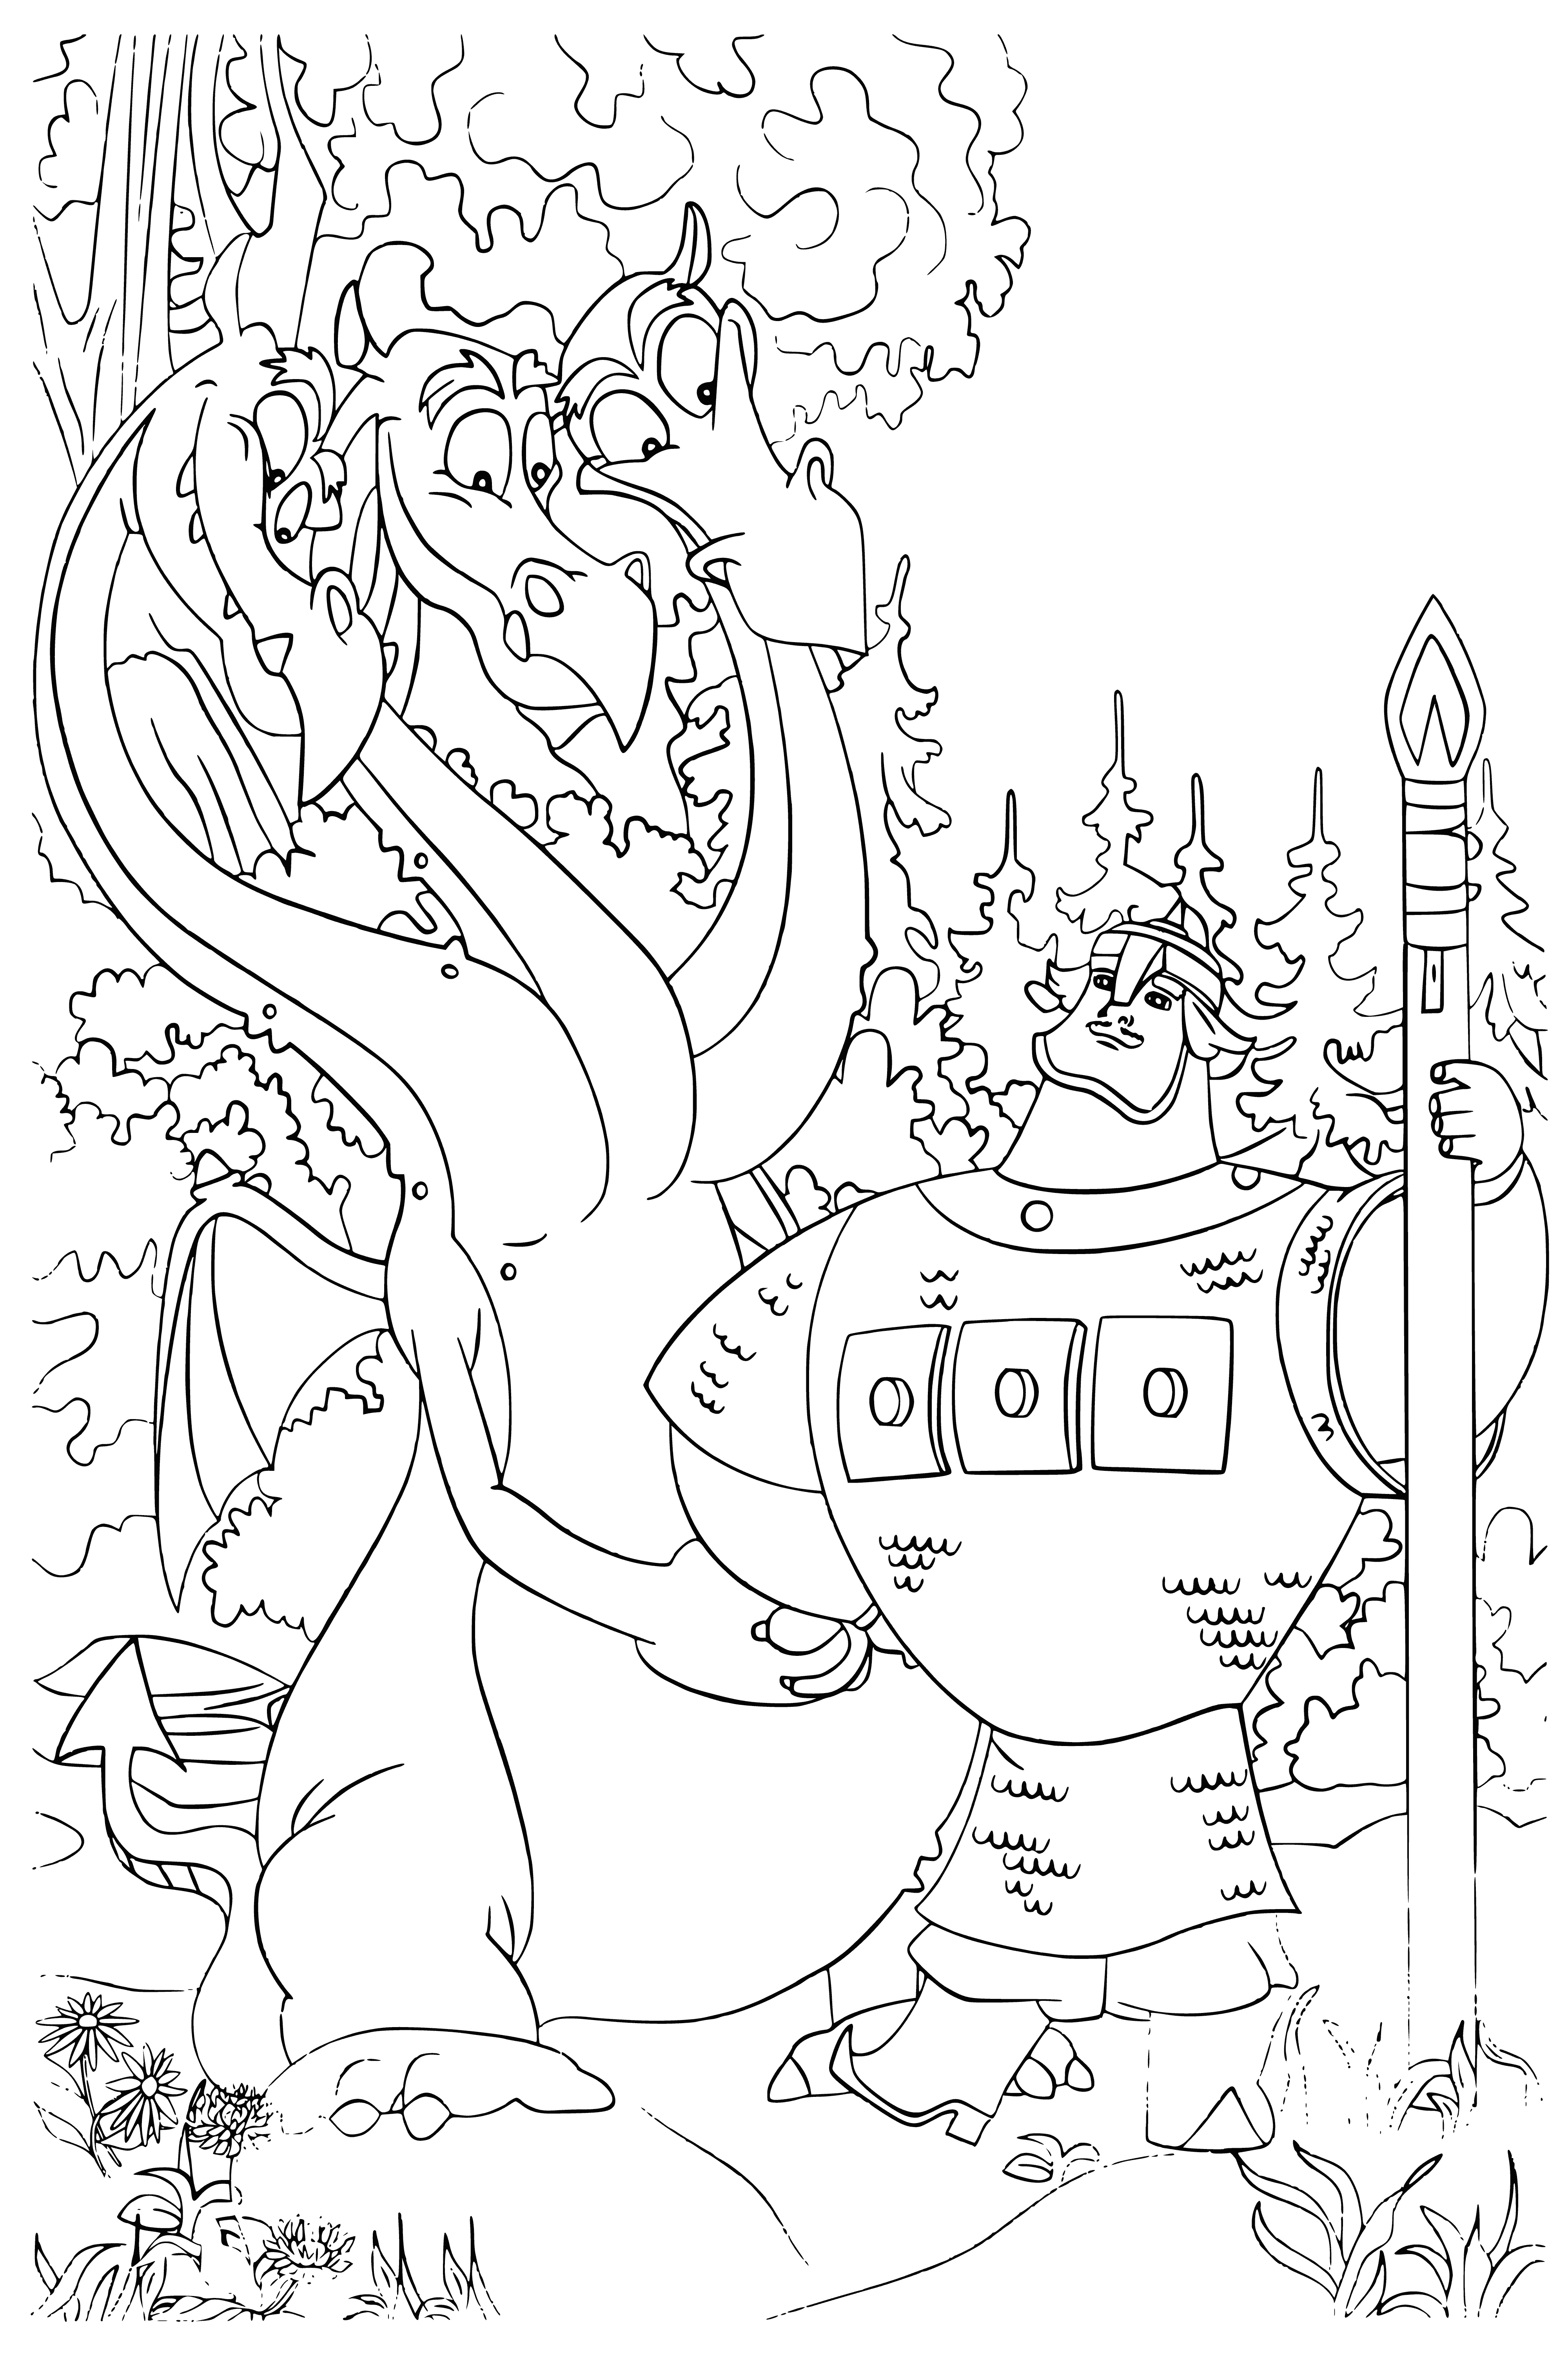 coloring page: Man in armor stands on hill, sword ready, facing giant snake with human head coiled around tree.